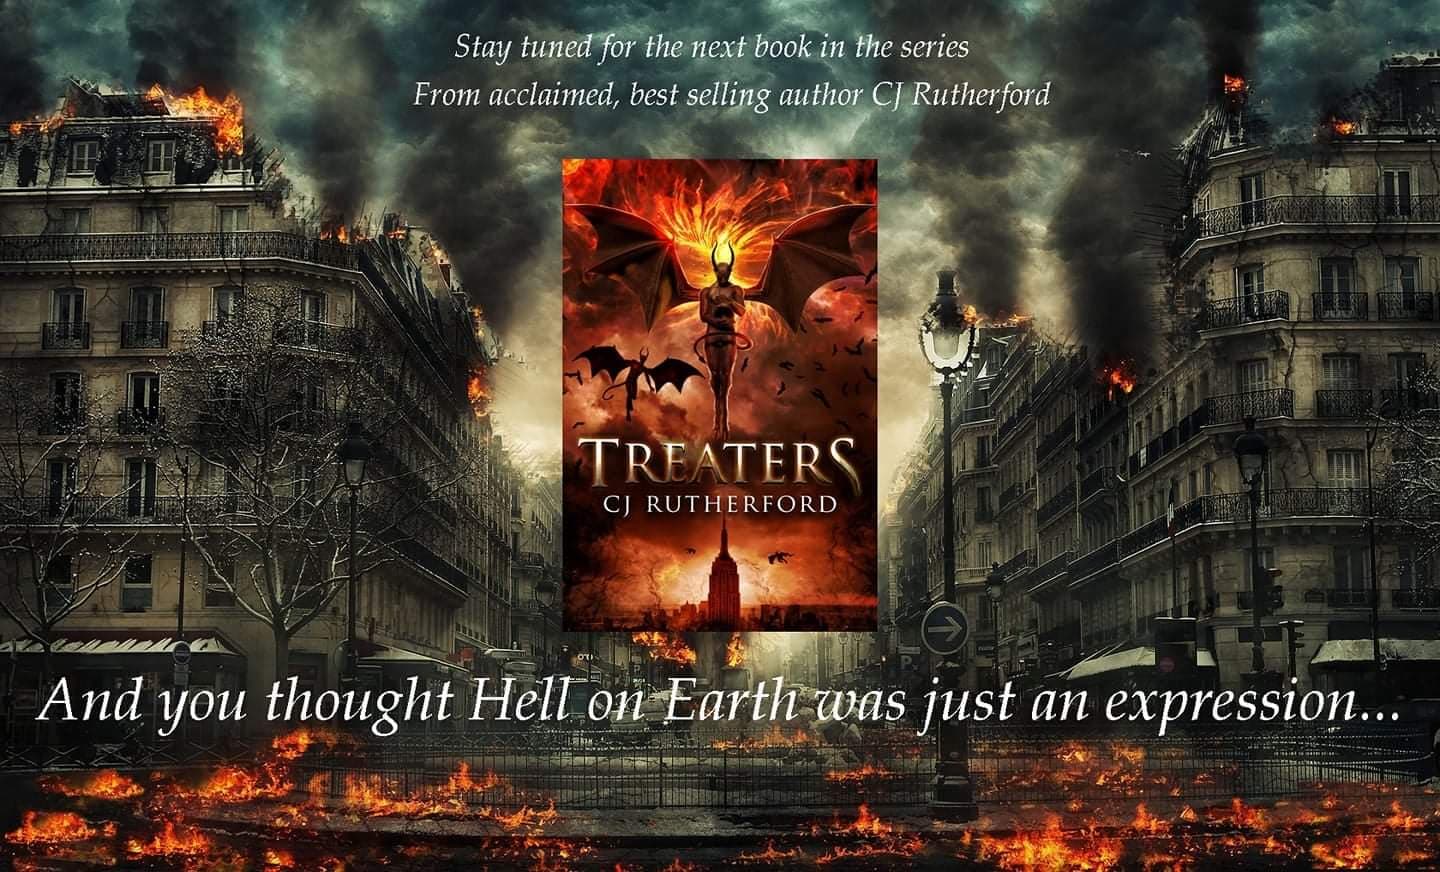 tbm horror - horror promotion - Treaters A post apocalyptic horror Kindle Edition by CJ Ruthenford